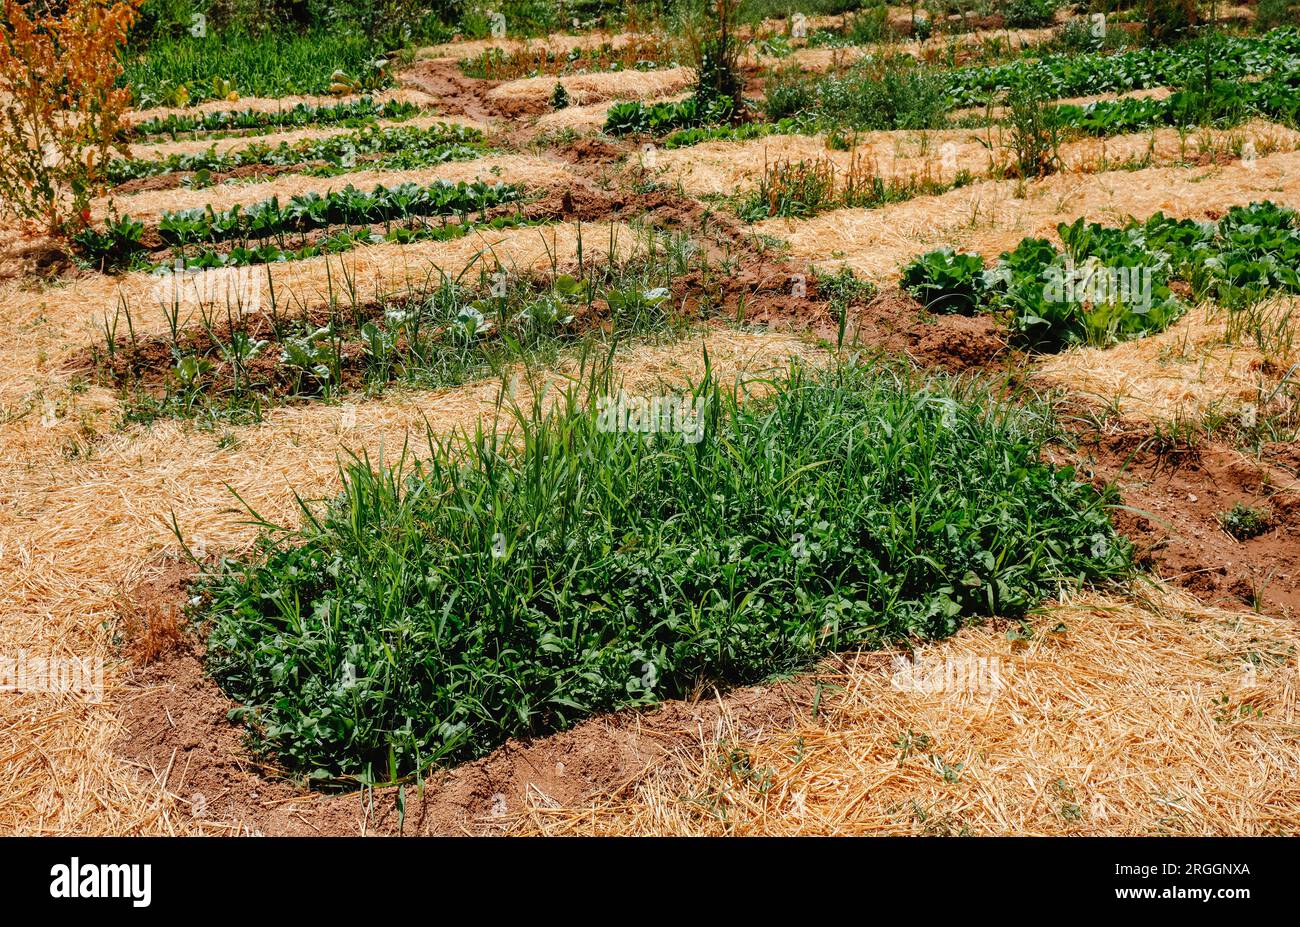 detail of a vegetable garden in Spain, on a summer day Stock Photo